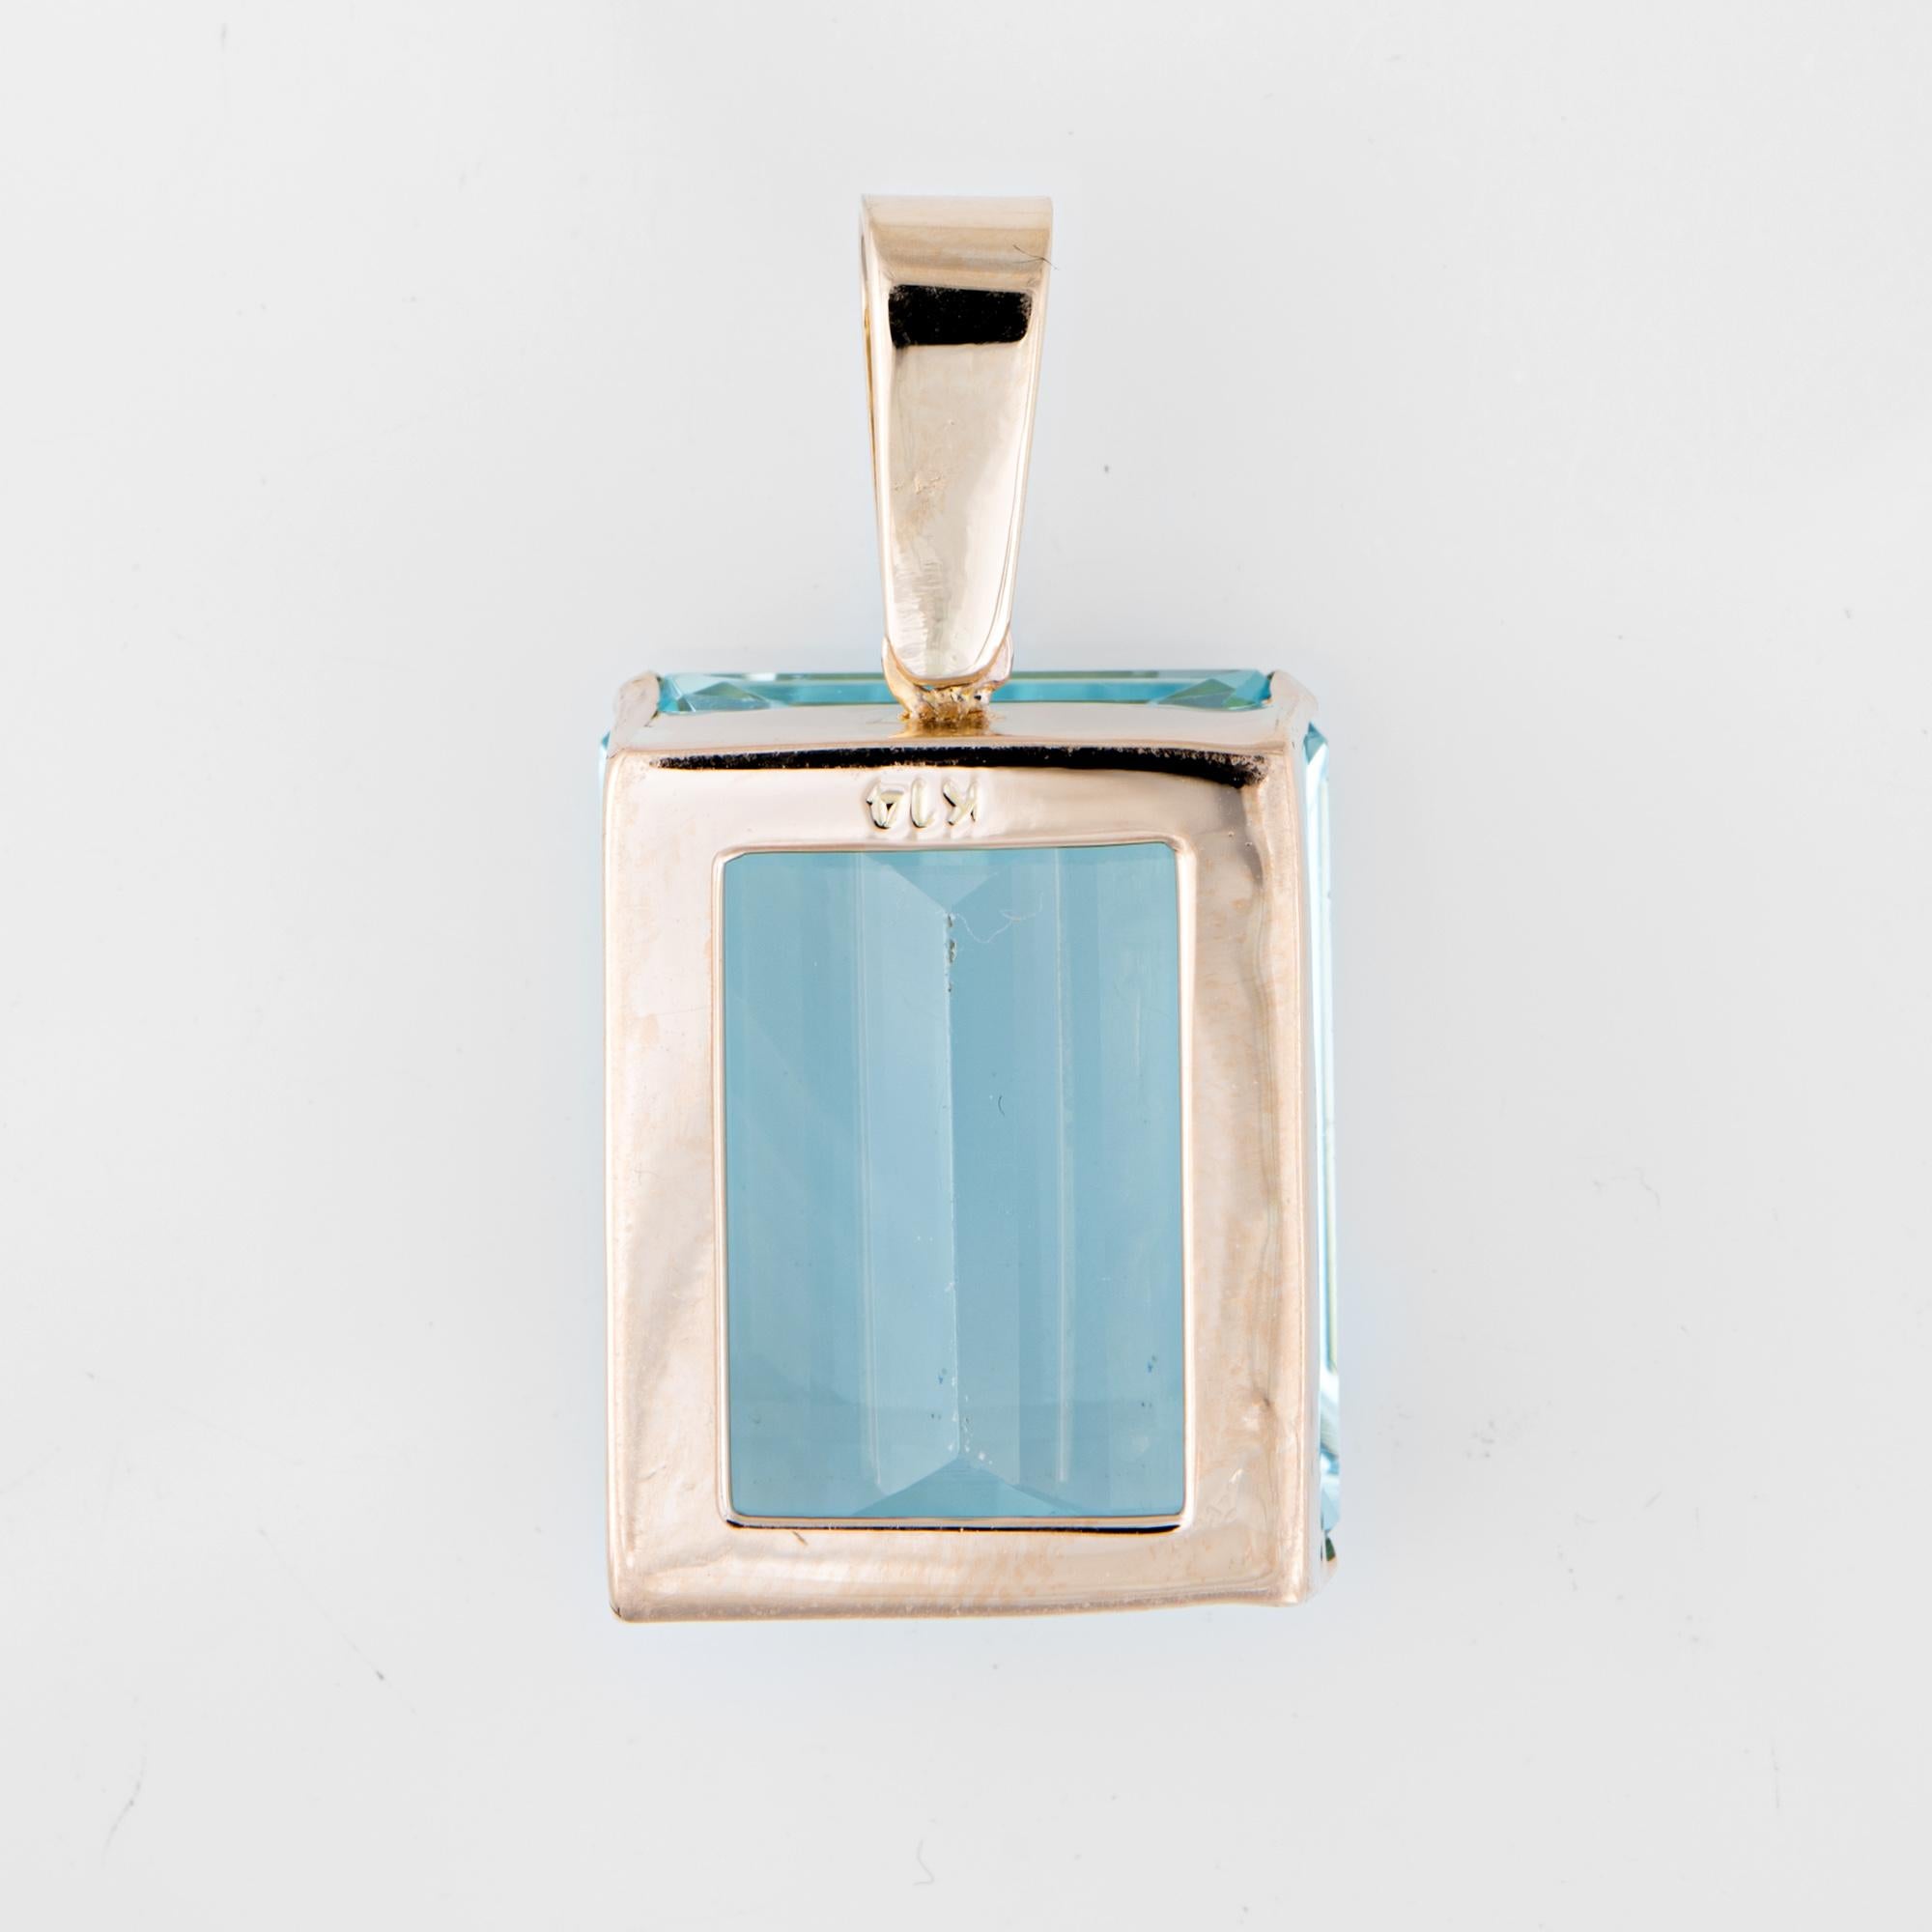 Finely detailed vintage large aquamarine pendant (circa 1950s to 1960s) crafted in 14k yellow gold.  

Emerald cut aquamarine measures 24mm x 19mm x 12.5mm (estimated at 40 carats). The aquamarine is in very good condition and free of cracks or